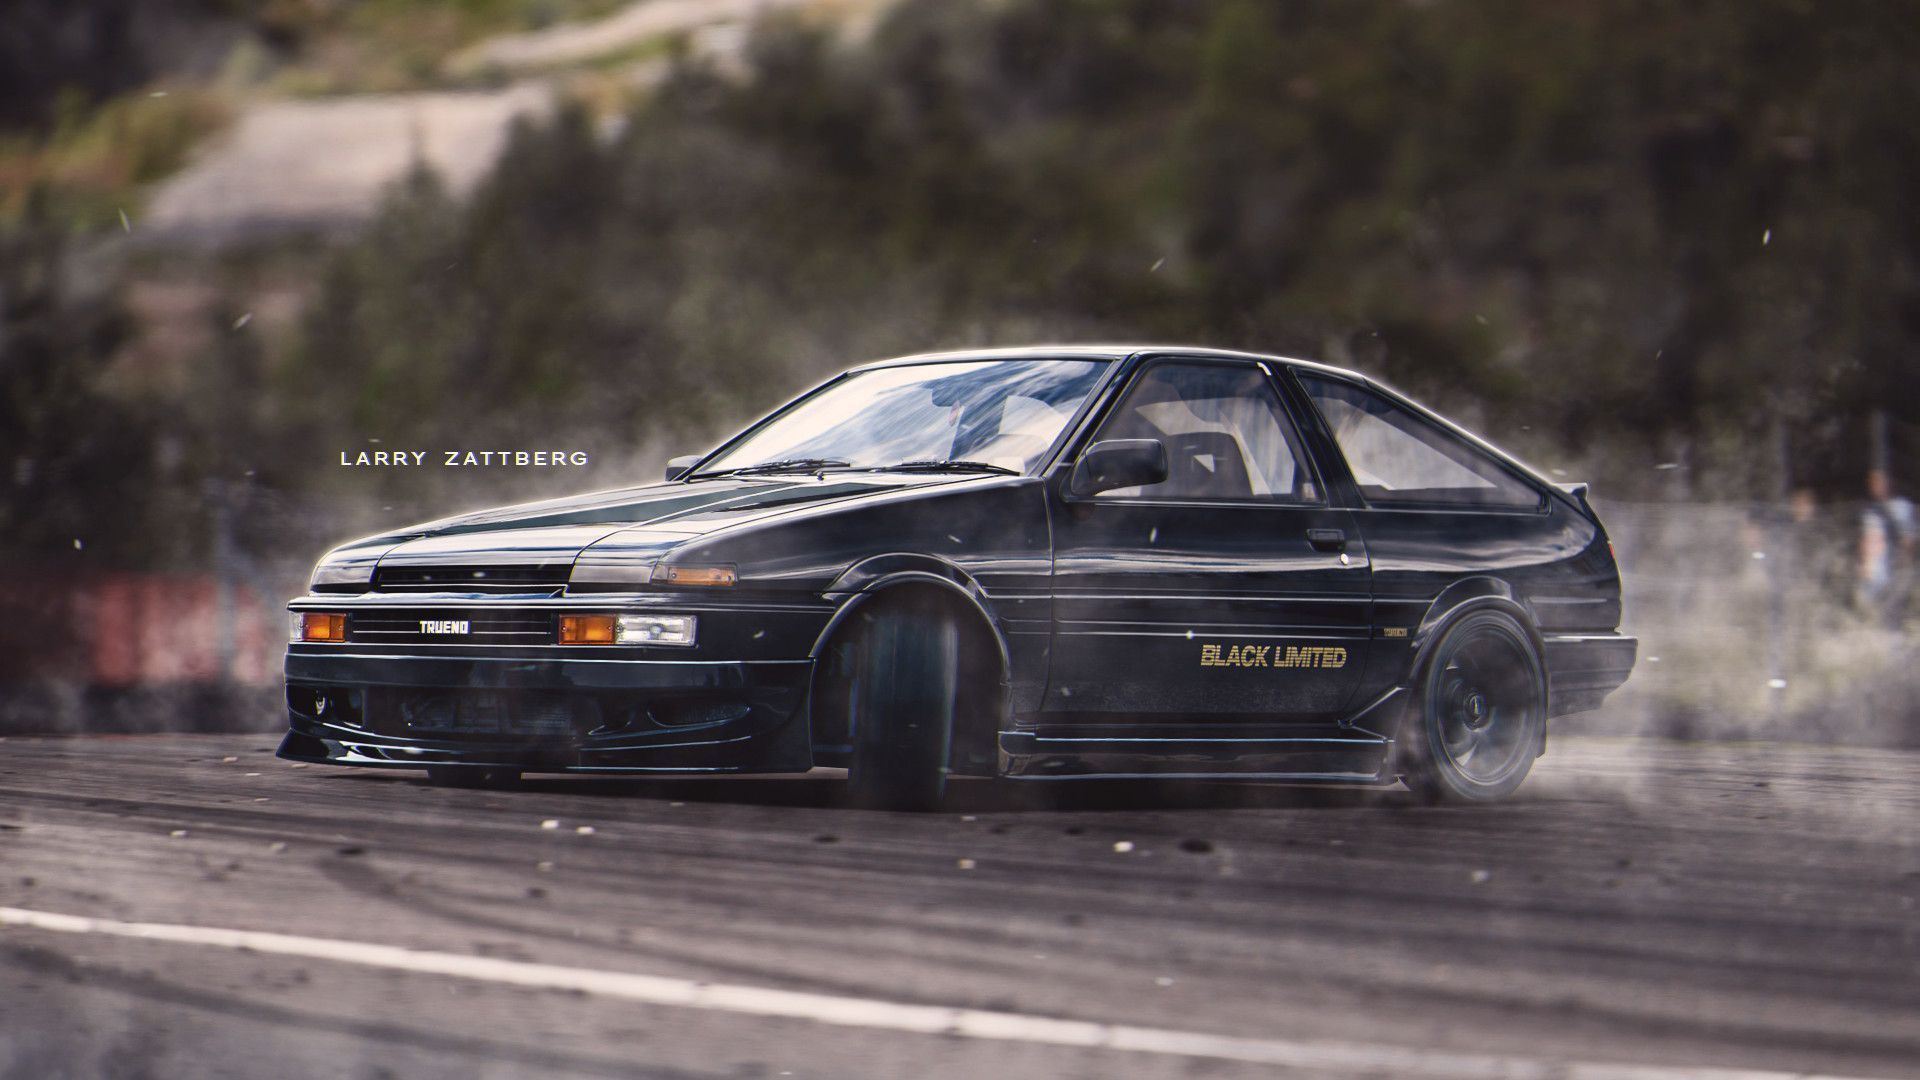 Free download Ae86 Wallpaper Top Free Ae86 Background [1920x1080] for your Desktop, Mobile & Tablet. Explore Toyota Sprinter Anime Wallpaper. Toyota Celica Wallpaper, Toyota Supra Wallpaper, Toyota Tacoma Wallpaper